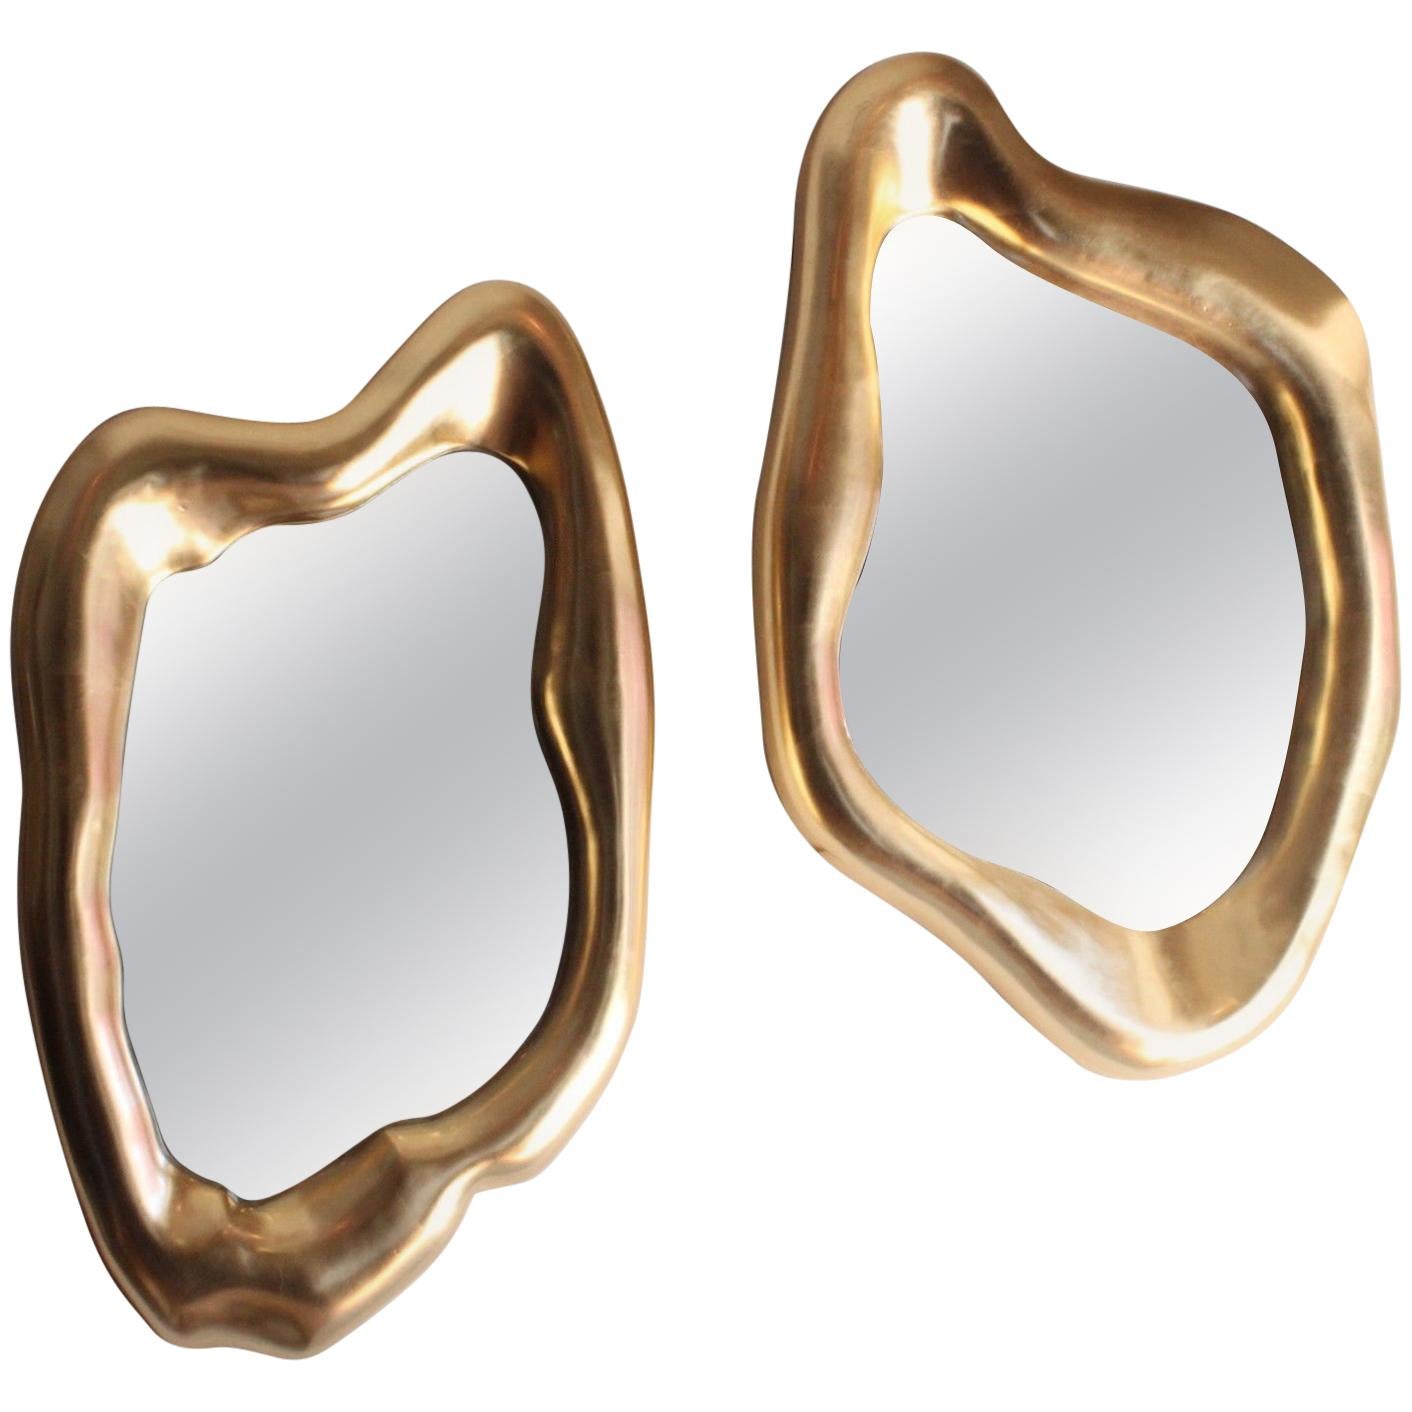 Pair of Gold Mirrors For Sale